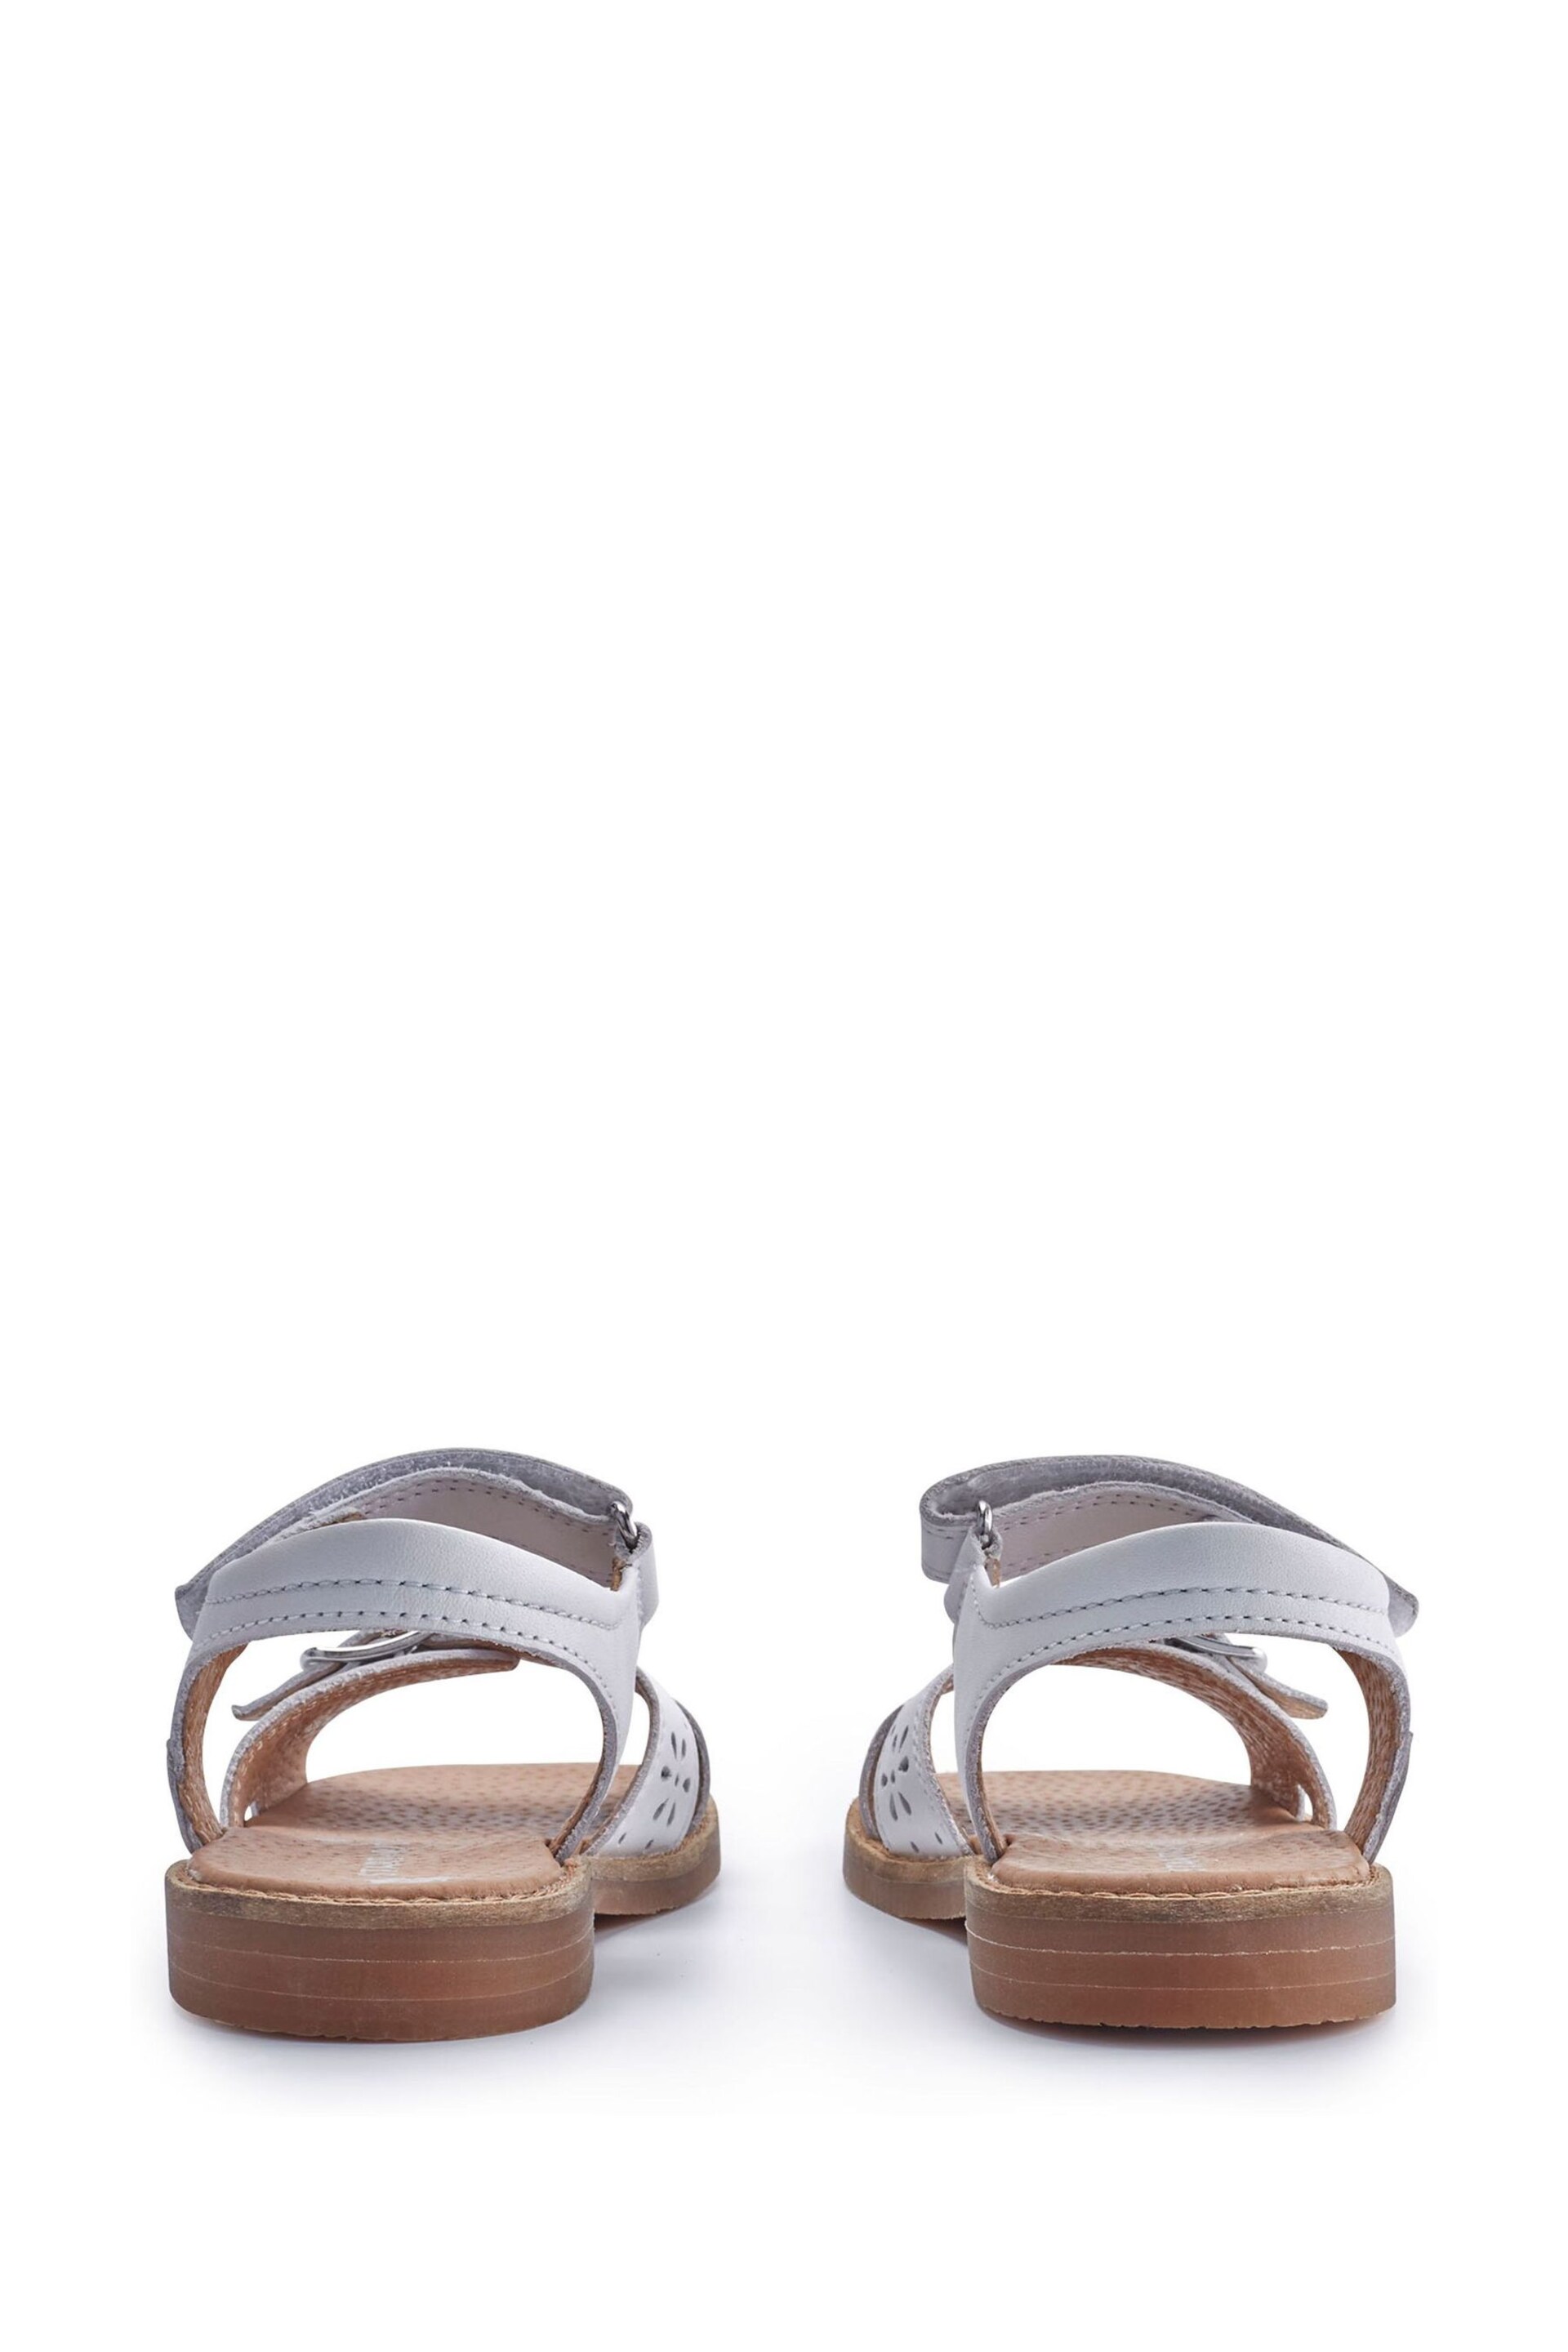 Start-Rite Holiday Leather Buckle & Rip-Tape Sandals F Fit - Image 5 of 7